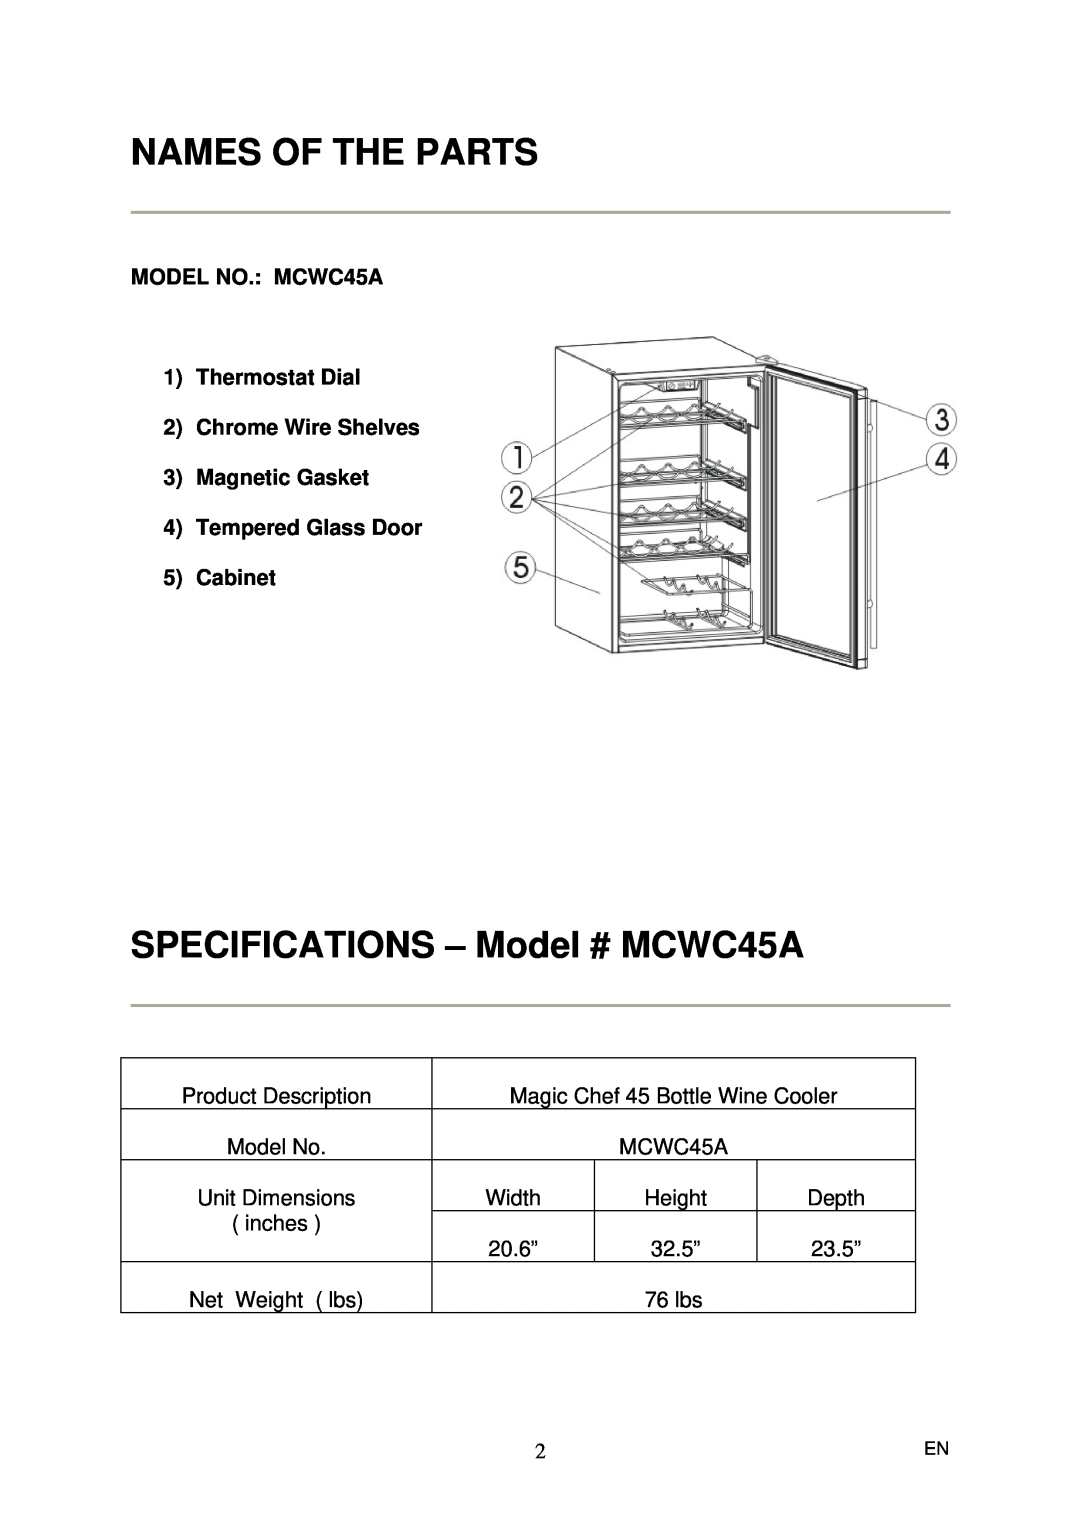 Magic Chef instruction manual Names Of The Parts, SPECIFICATIONS - Model # MCWC45A, MODEL NO. MCWC45A 1Thermostat Dial 